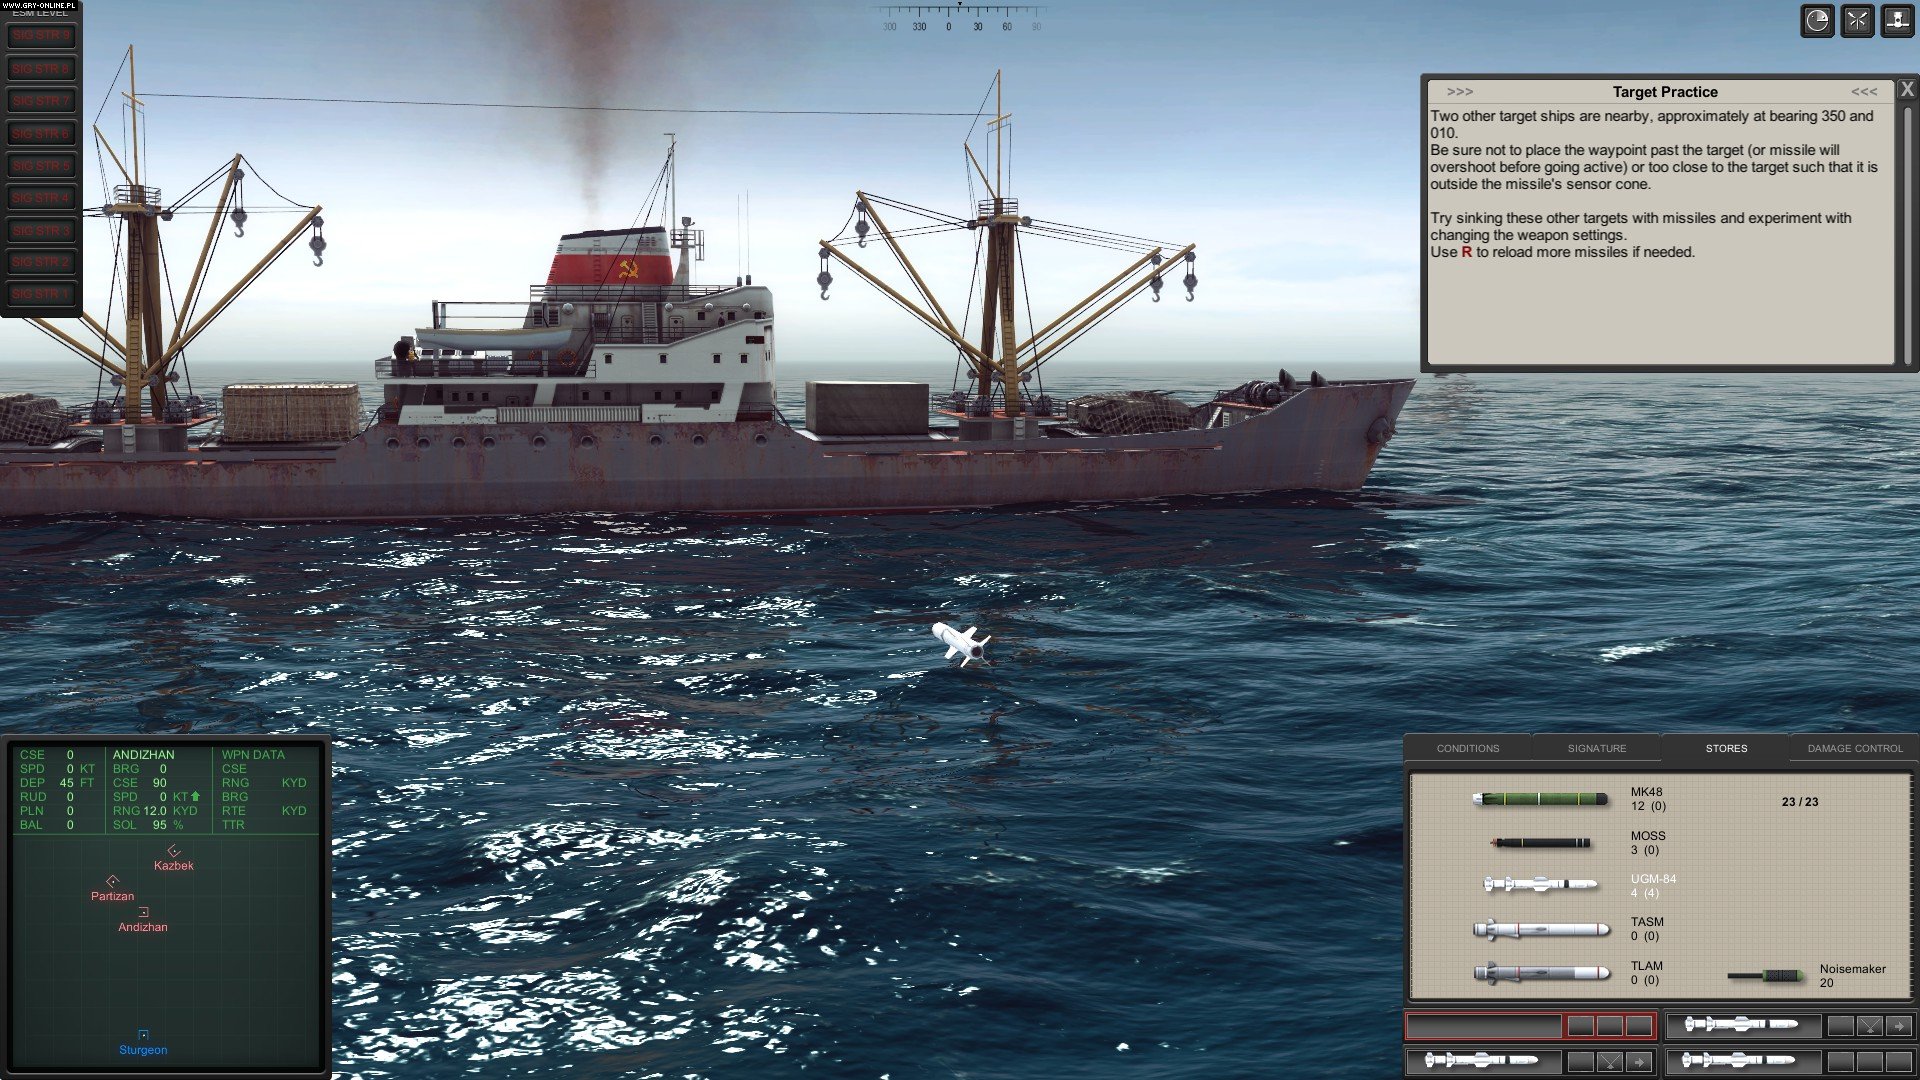 cold waters pc game max depth